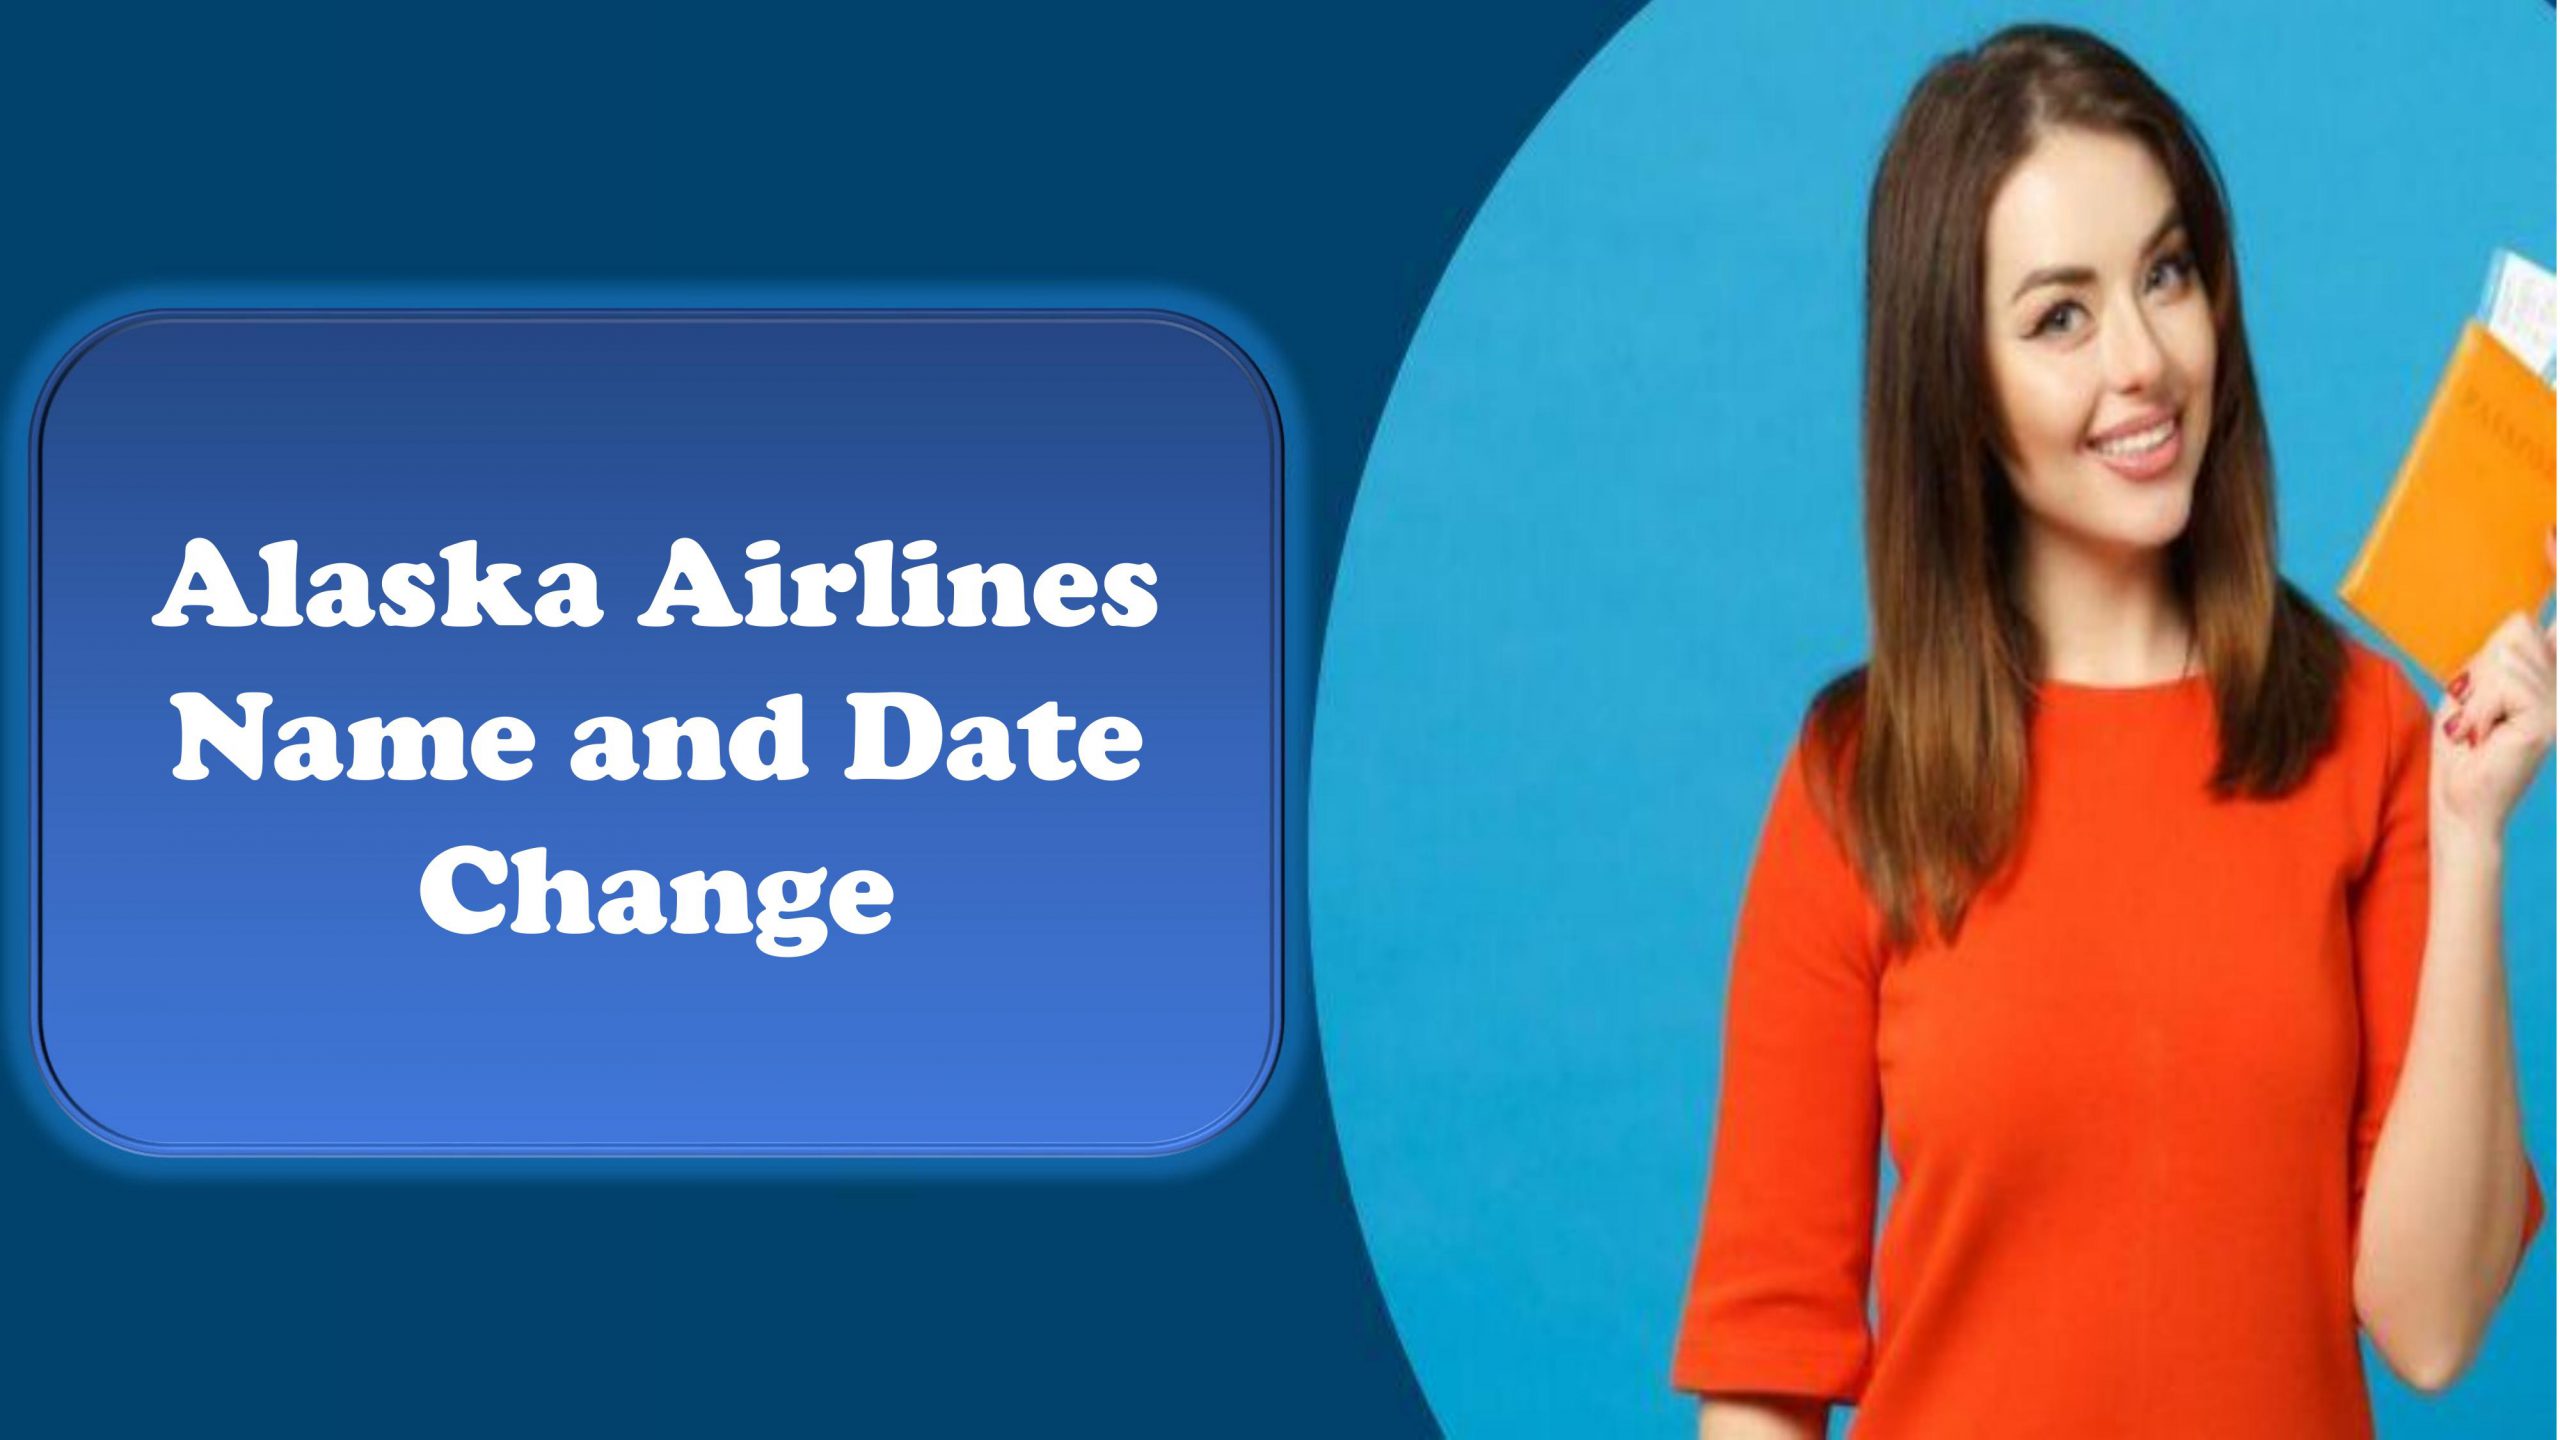 How to Change Name and Date in Alaska Airlines?